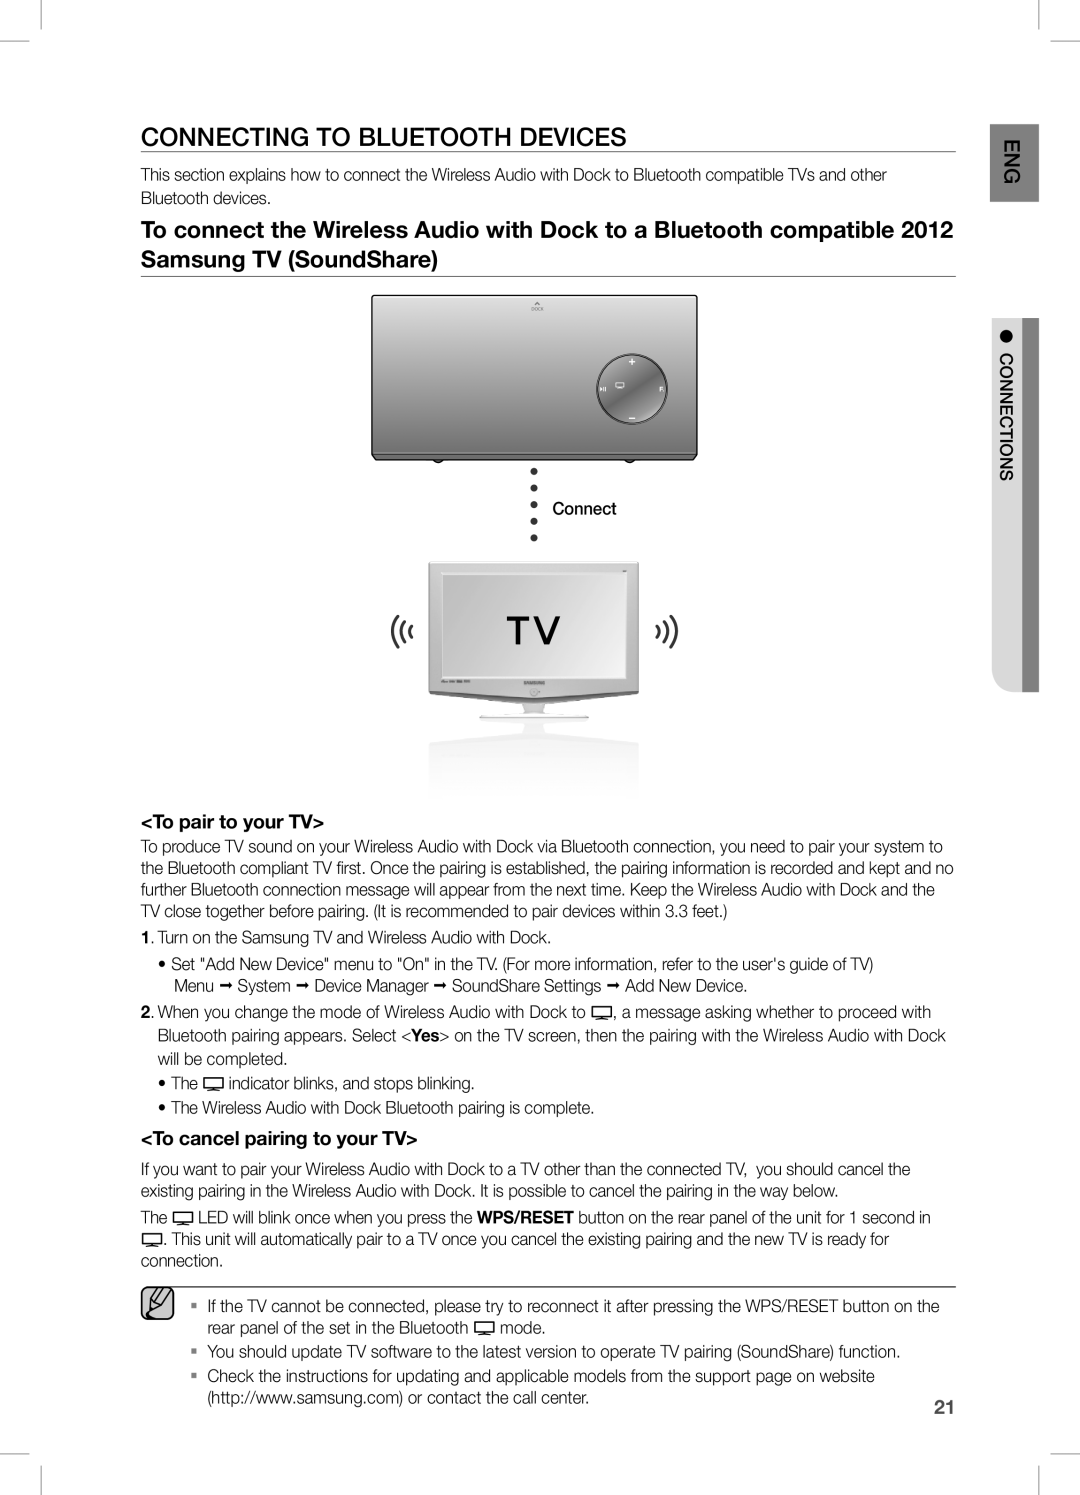 Samsung DAE670ZA, DA-E670 user manual Connecting to Bluetooth Devices, To pair to your TV, To cancel pairing to your TV 